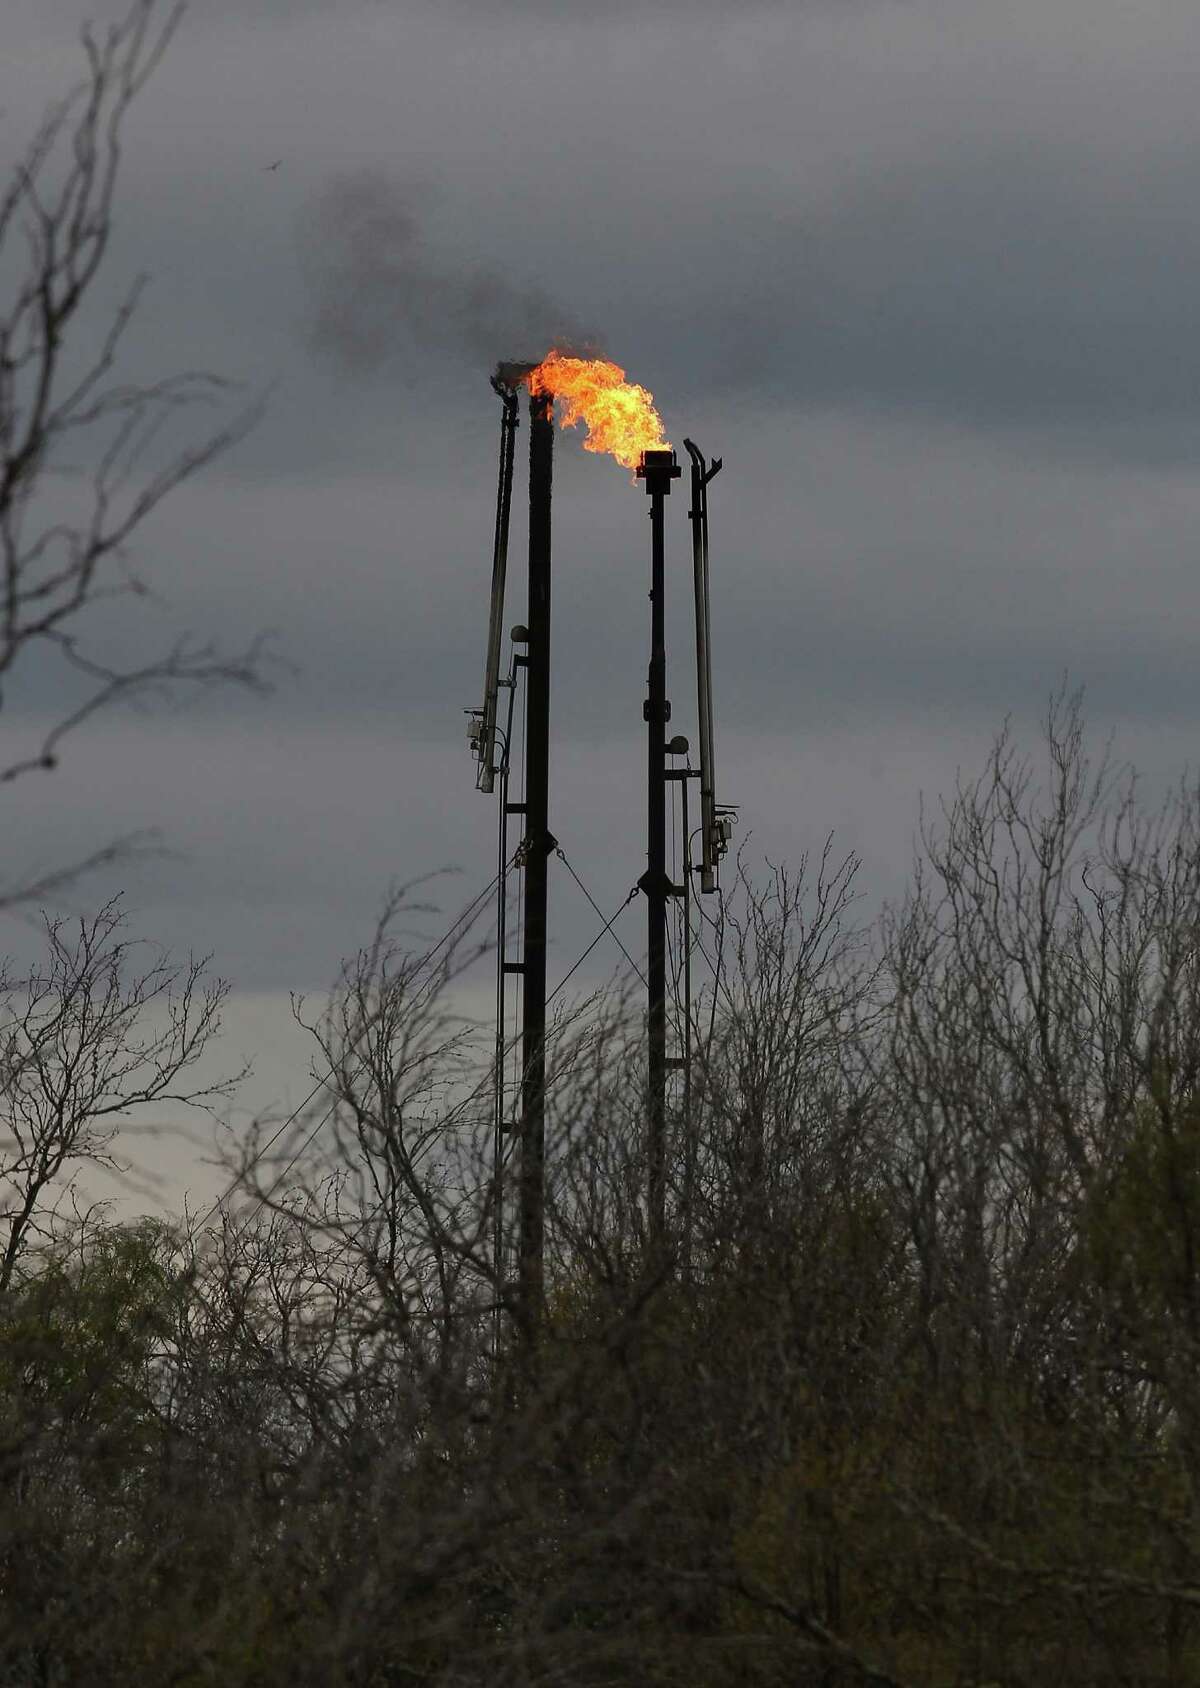 A flare burns natural gas at the Brown Trust oil lease near Cotulla on Highway 97 in La Salle County on Thursday, Dec. 11, 2014. Operated by Carrizo (Eagle Ford) LLC, flares at the lease burned more than 250 million cubic feet of gas in the first seven months of 2014, nearly a third of overall production according to data obtained from the Texas Railroad Commission. (Kin Man Hui/San Antonio Express-News)